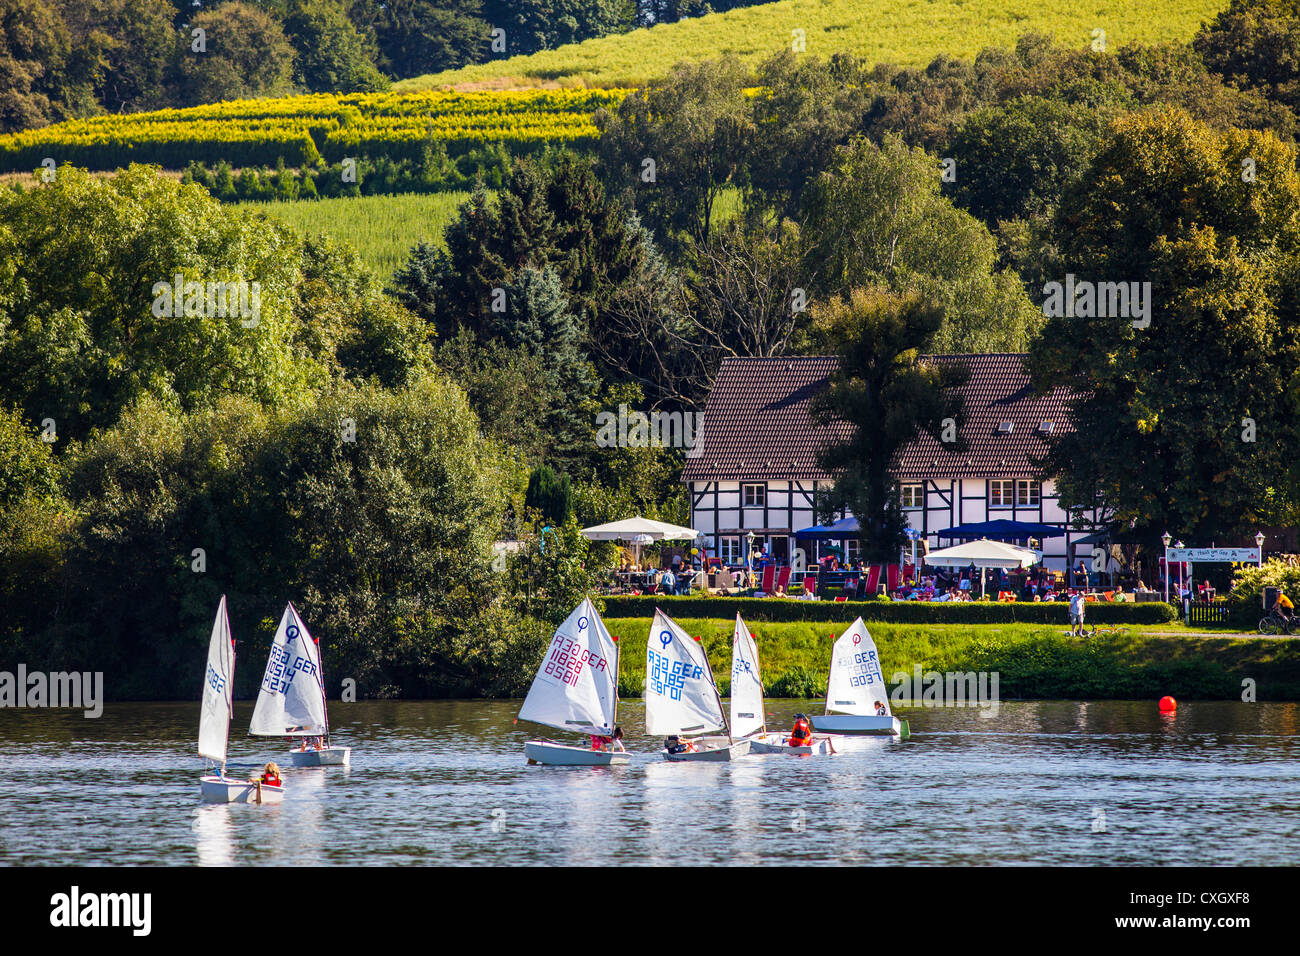 Small sailing boats on Baldeneysee lake, a reservoir of river Ruhr, Essen, Germany. Stock Photo